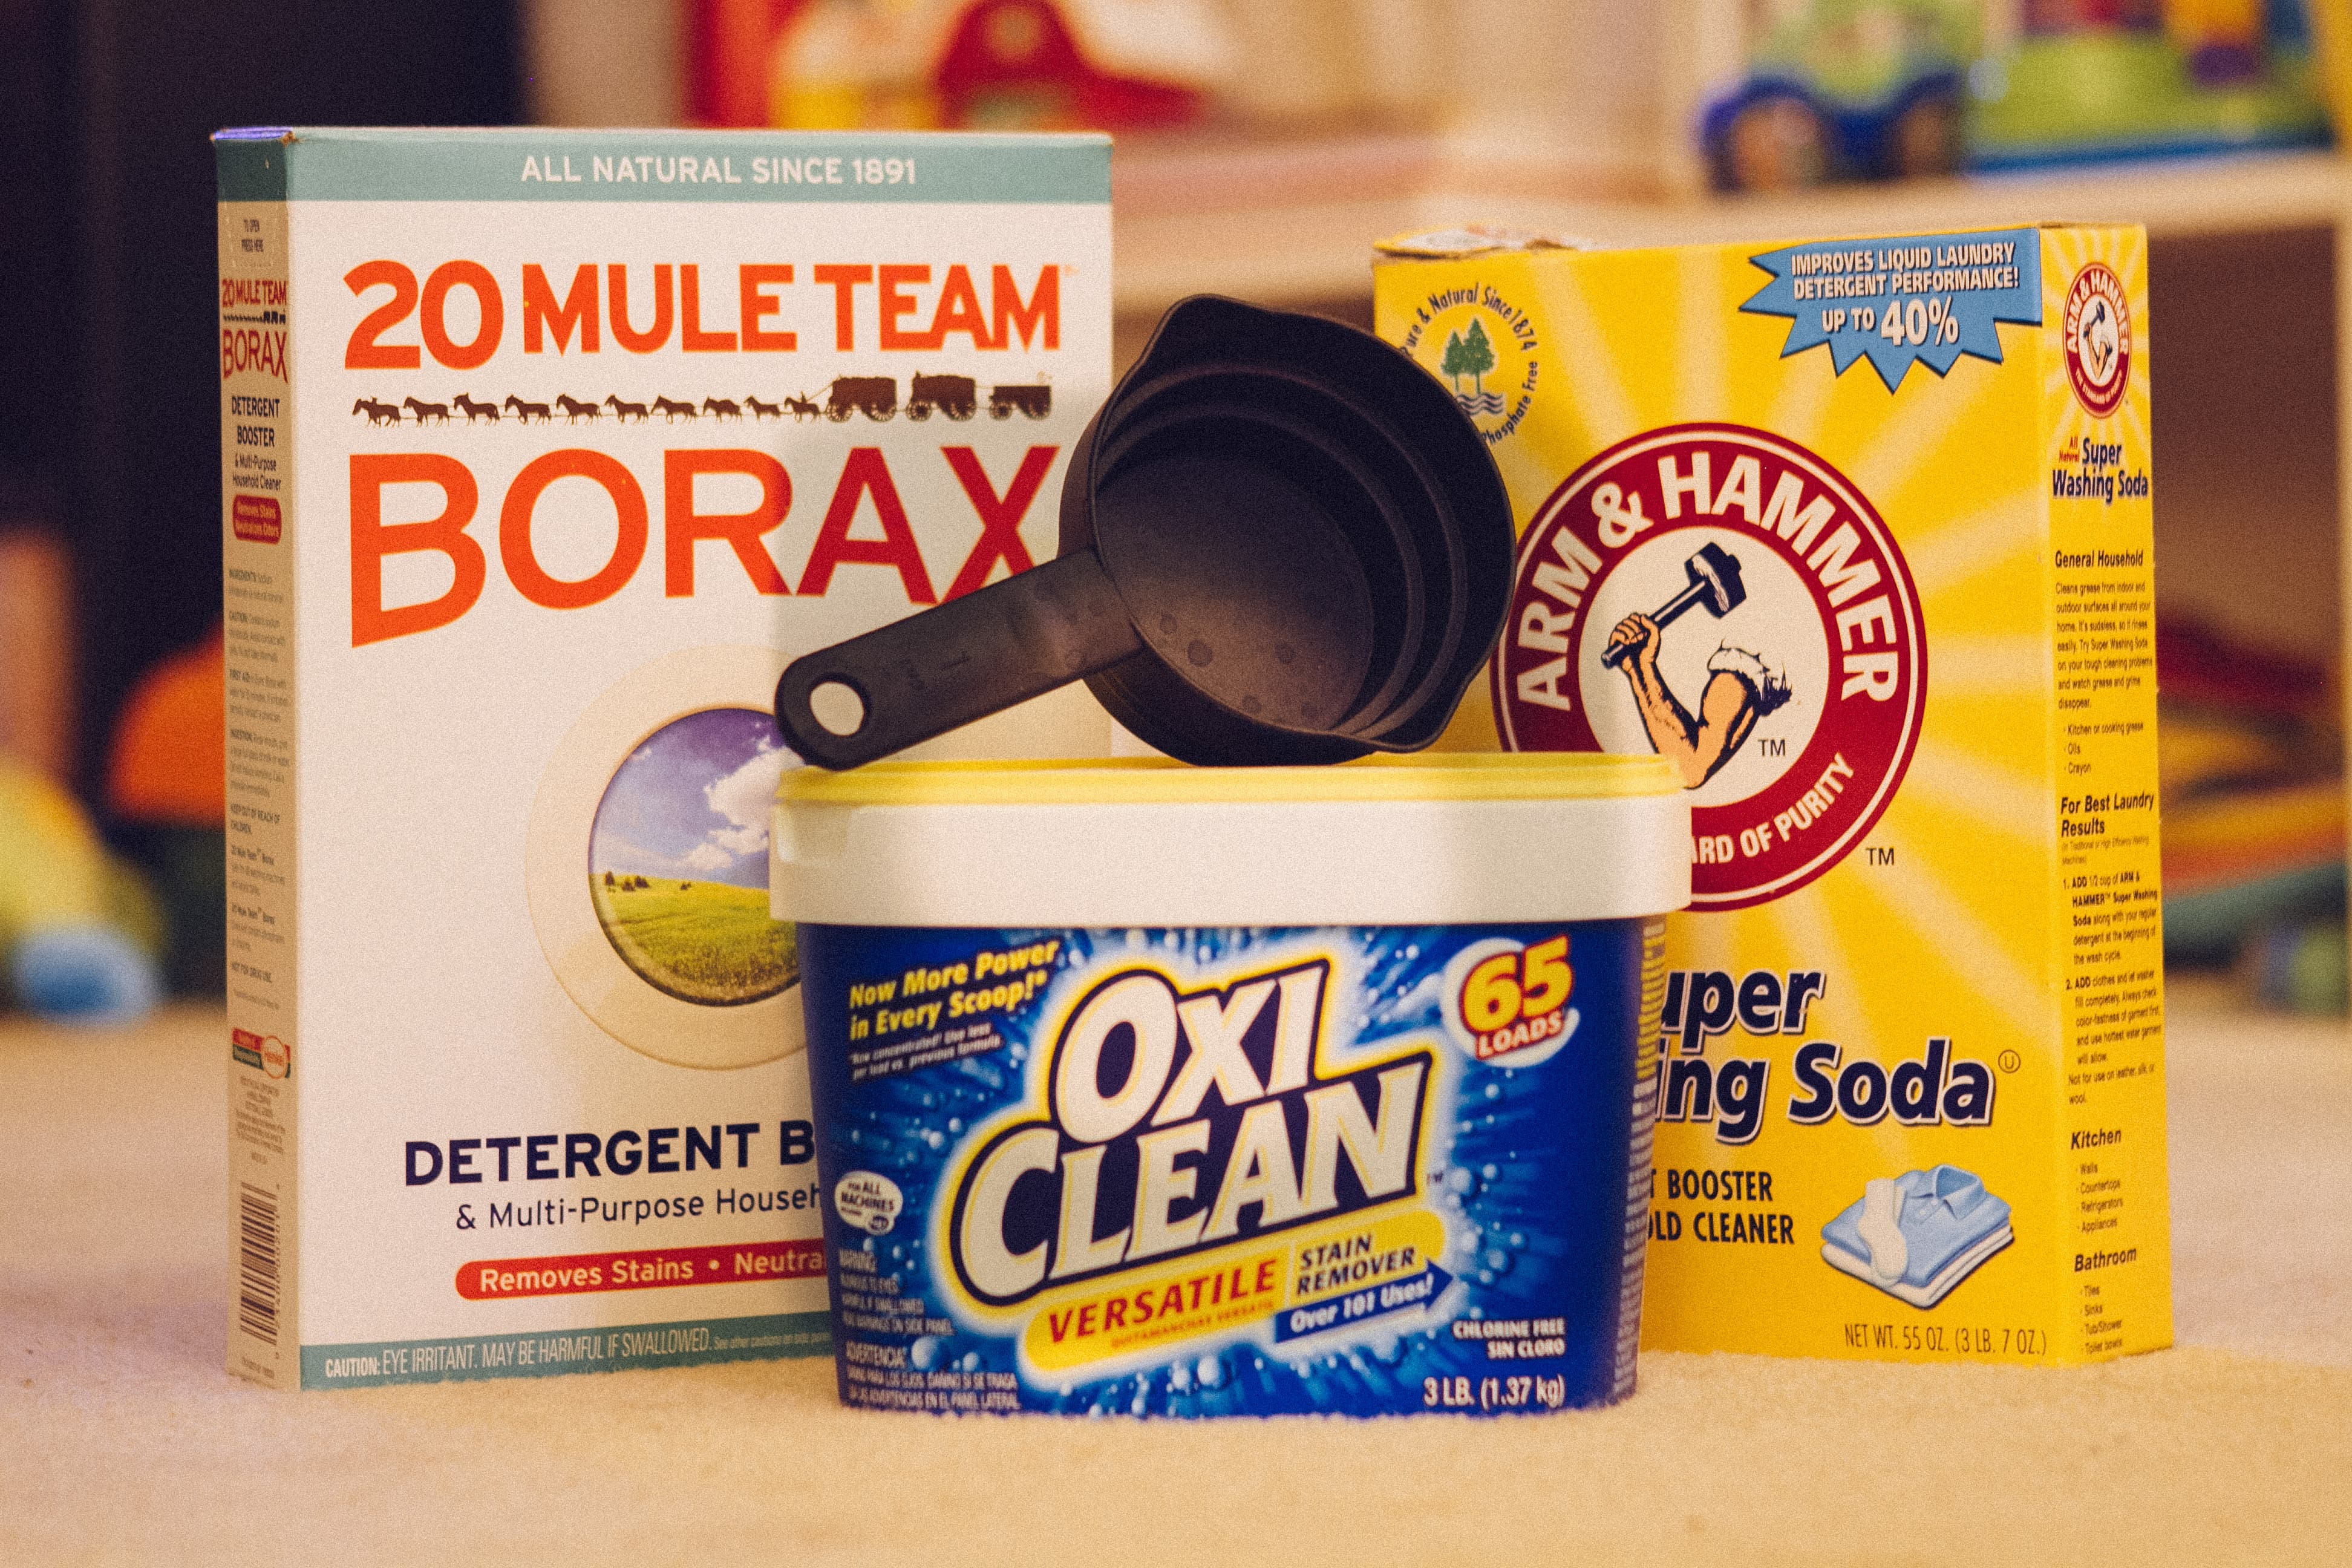 Everything you need for homemade laundry detergent